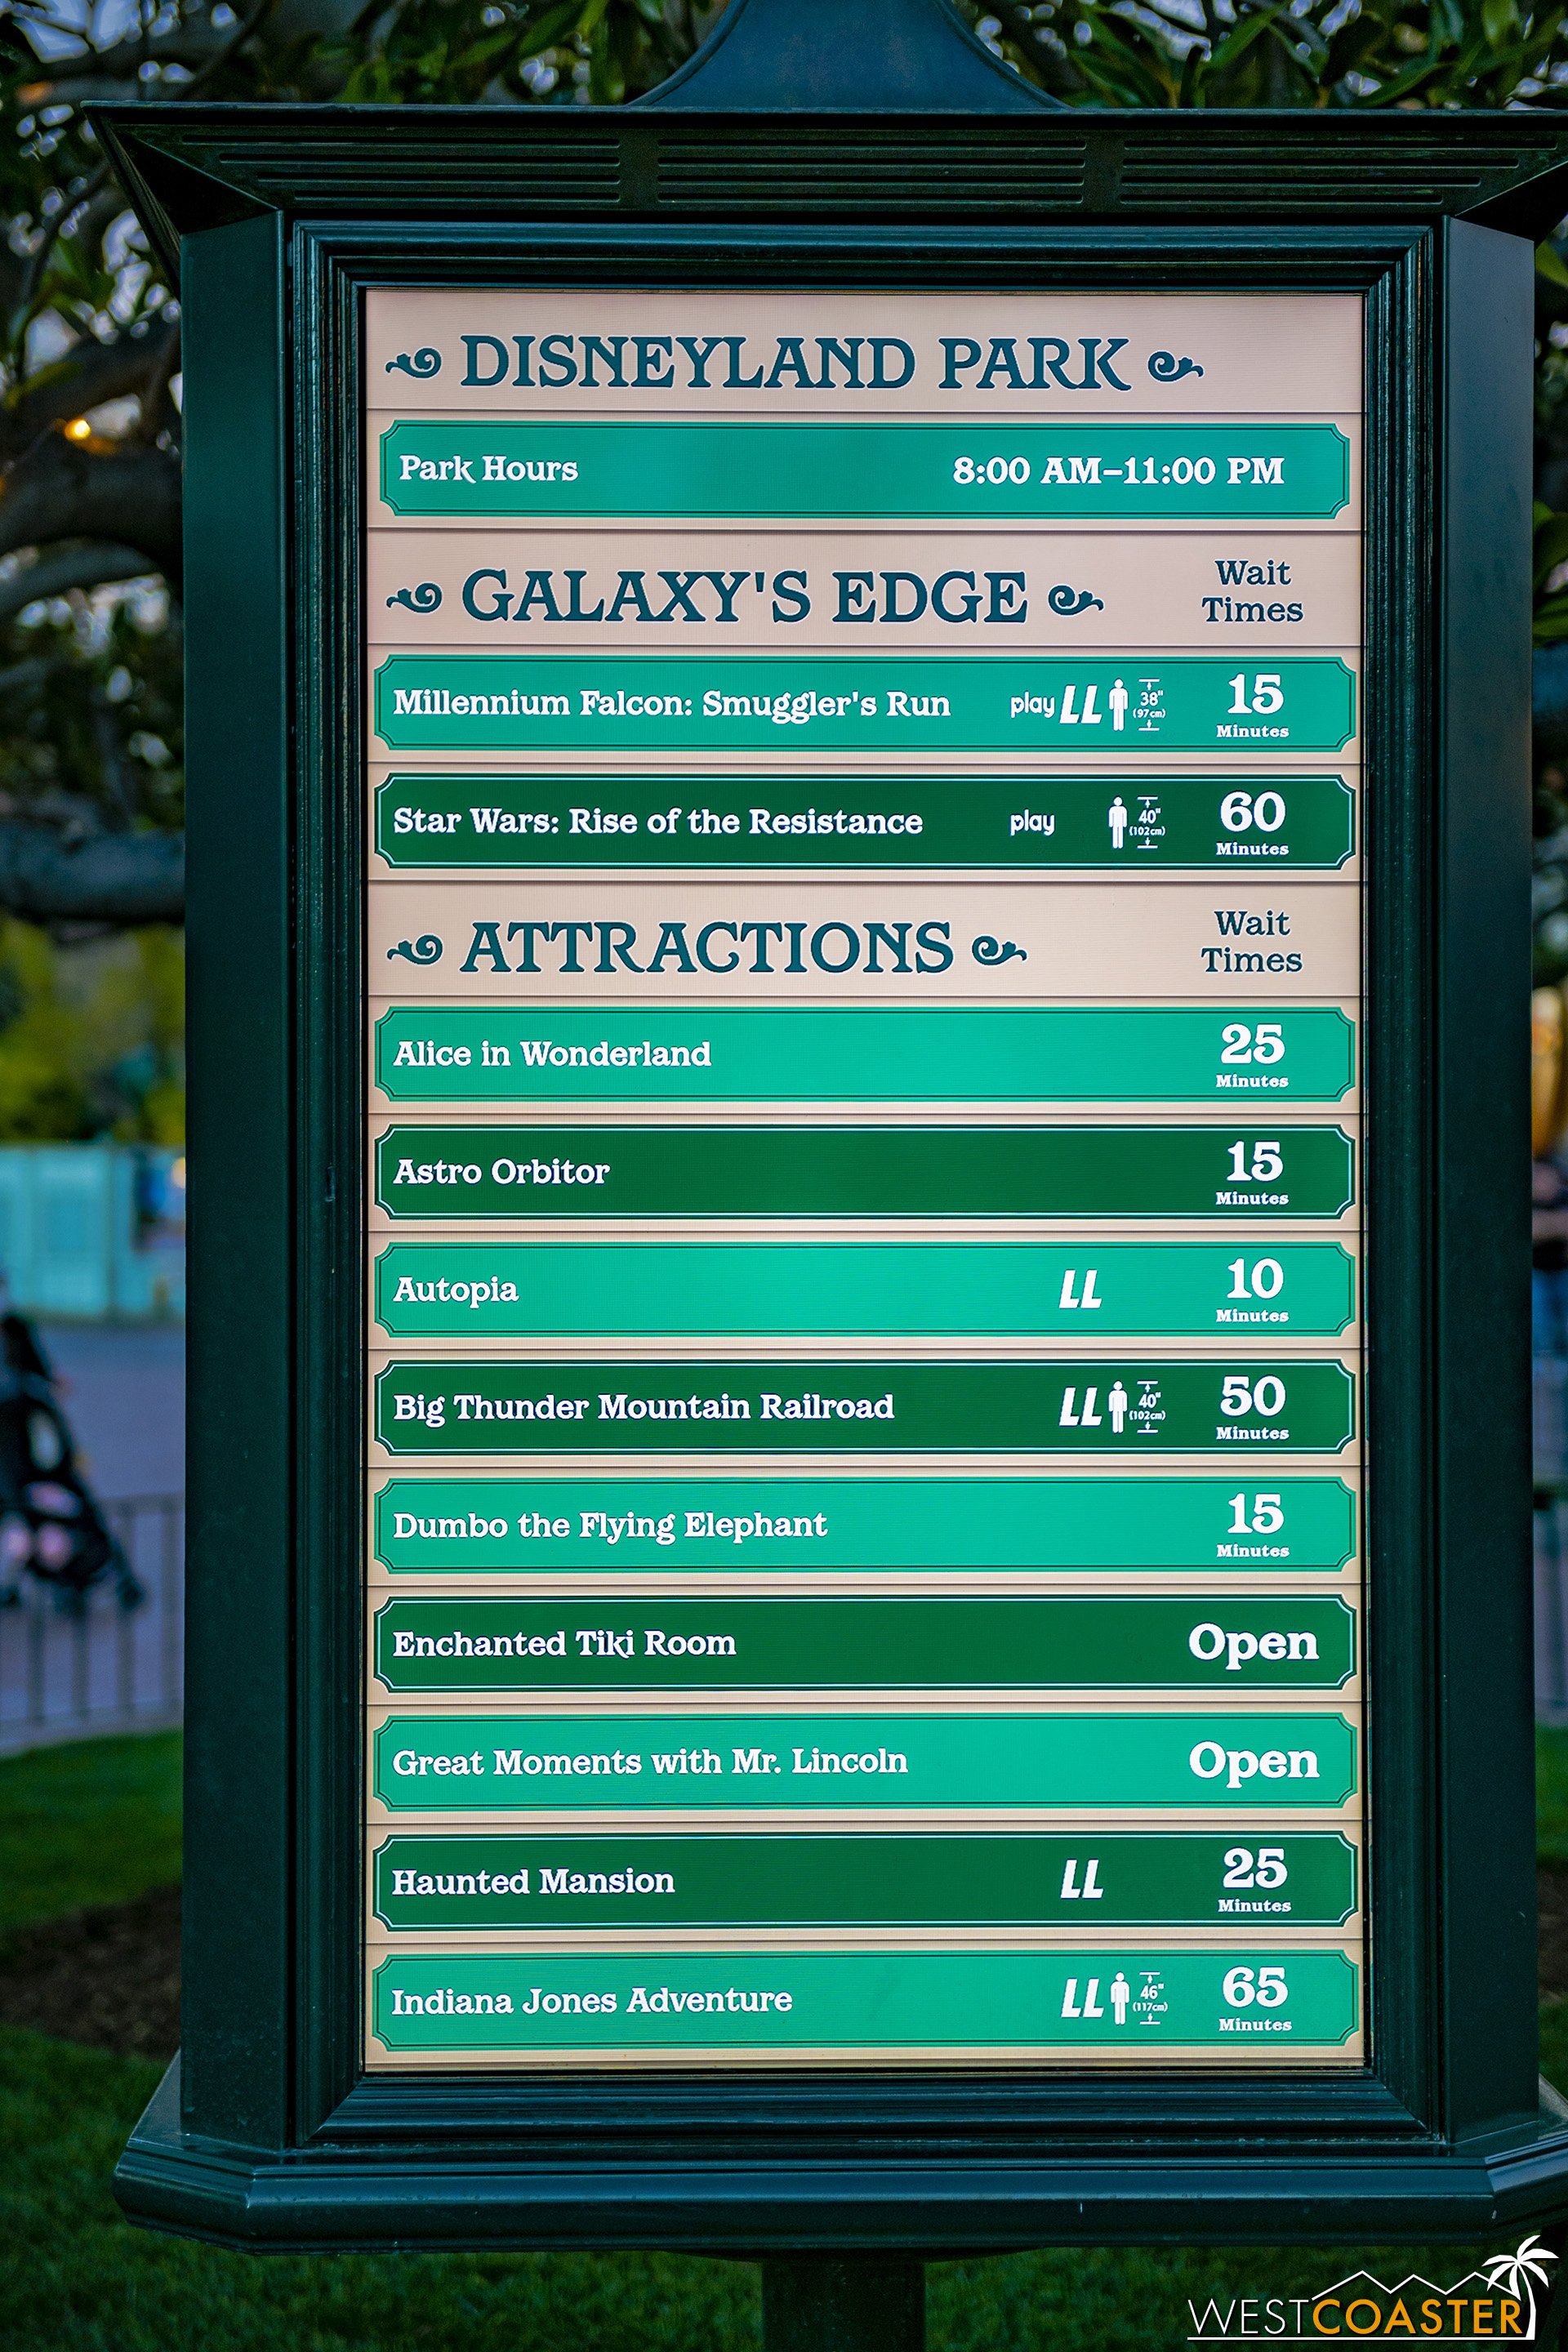  Although some waits, like at Galaxy’s Edge, remains pretty low and comparable to earlier reopening waits (though I’ve also seen Smuggler’s Run up to 30-40 minutes), other attractions like Big Thunder and Indy are back up to peak times.  Some even lo